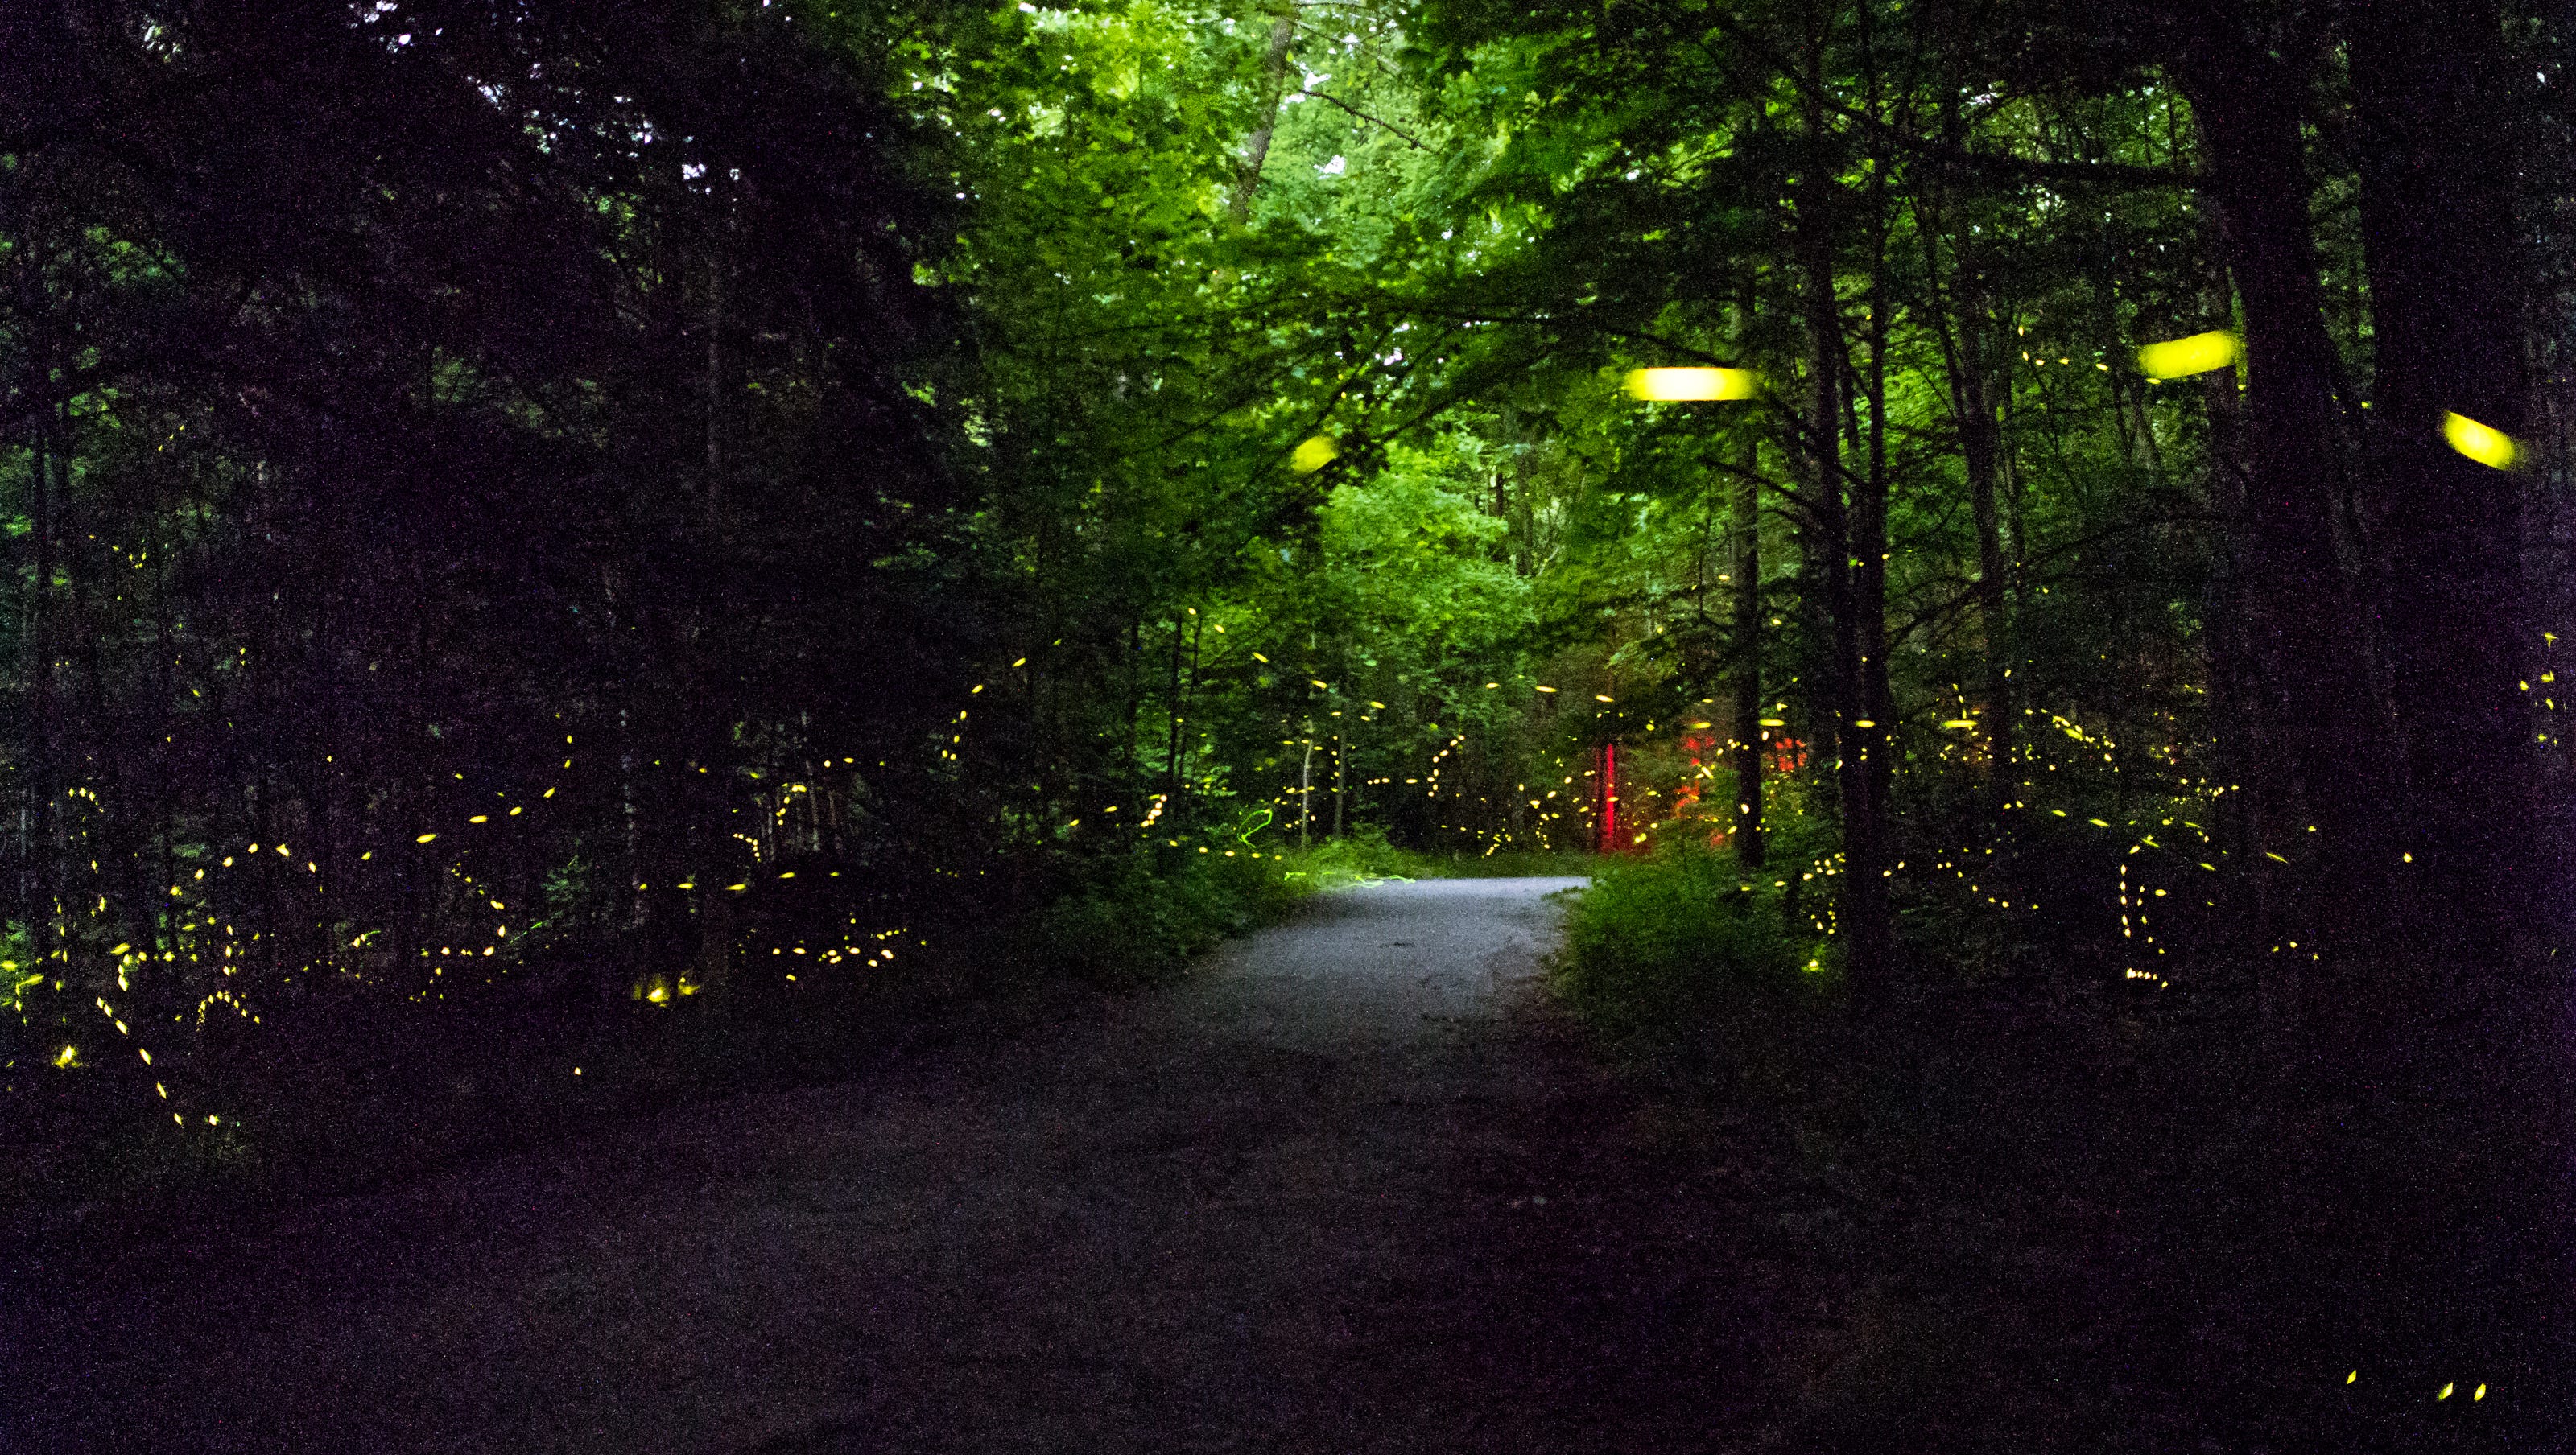 Synchronous firefly viewing lottery dates set in Great Smoky Mountains